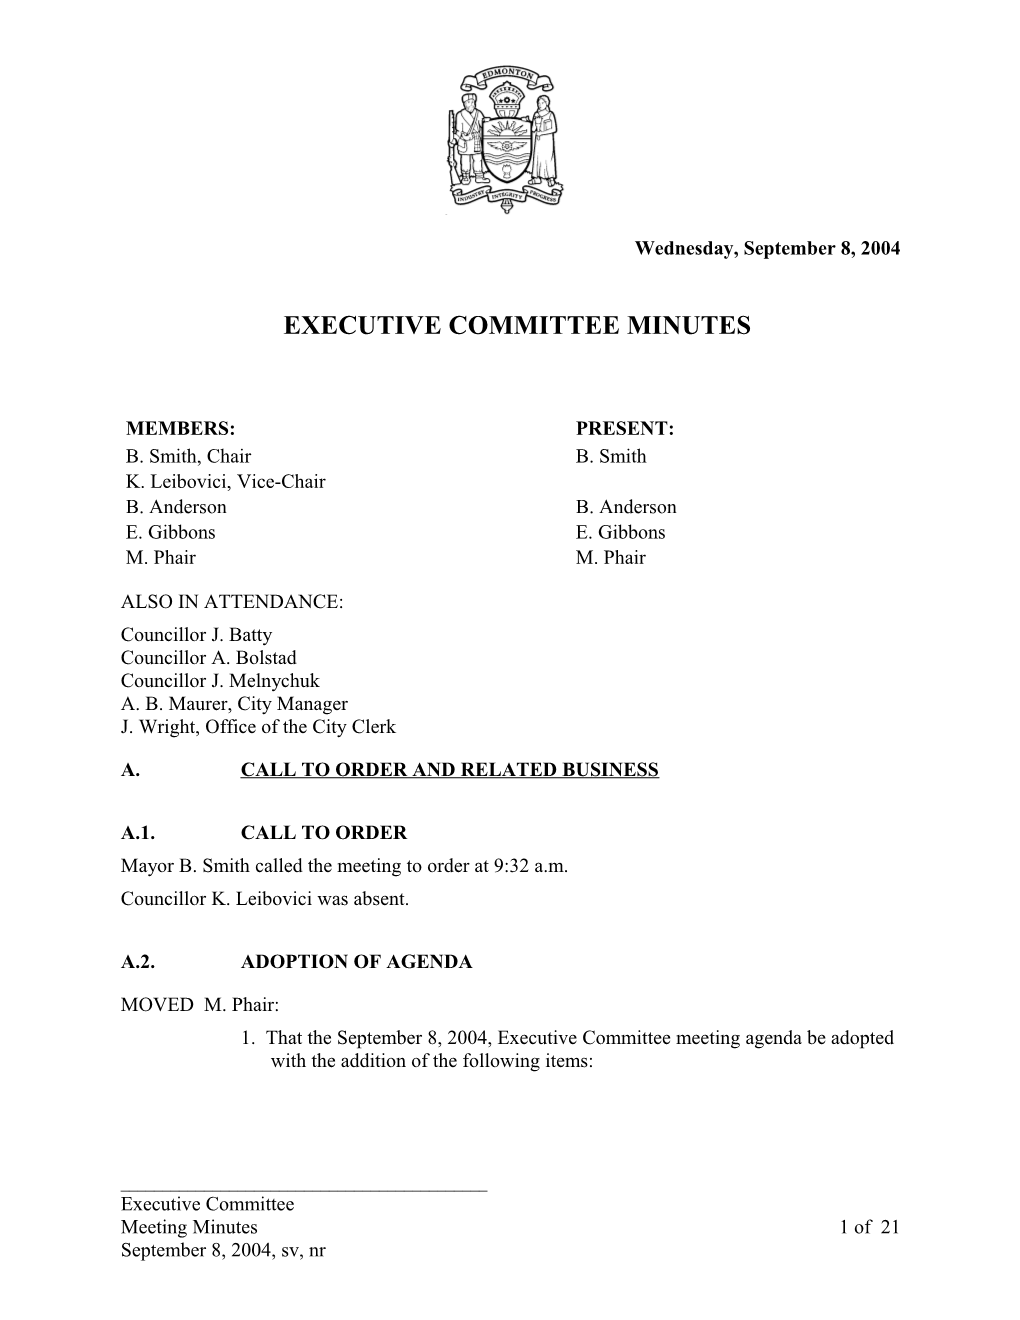 Minutes for Executive Committee September 8, 2004 Meeting